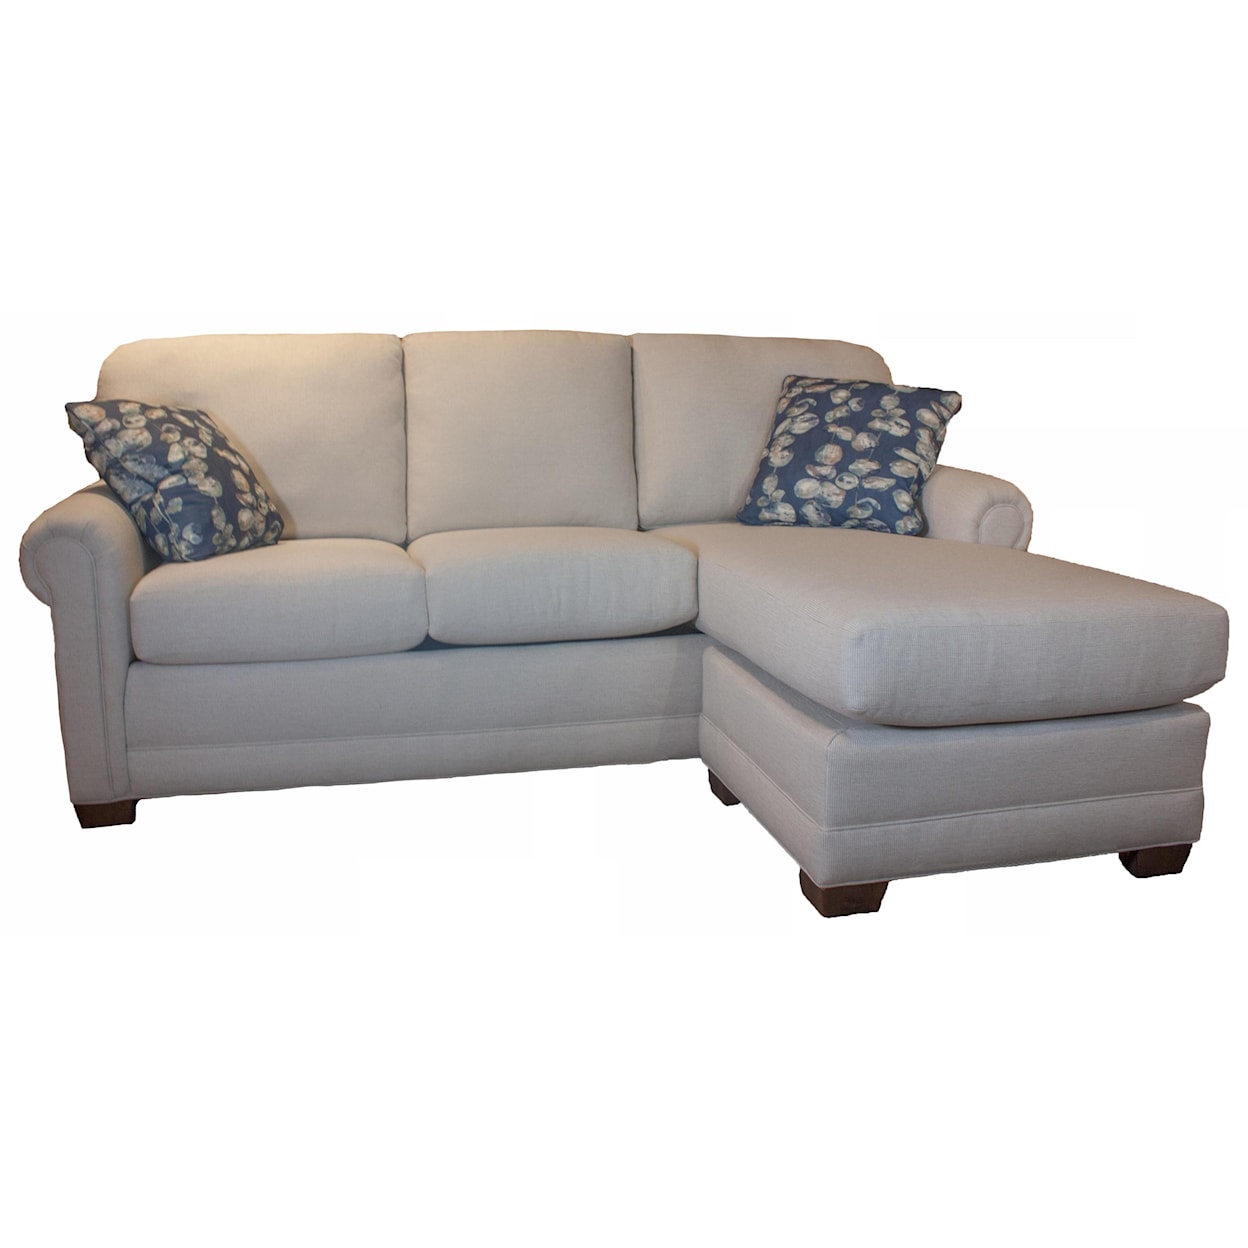 Temple Furniture Tailor Made 3 Seat Sofa with Chaise